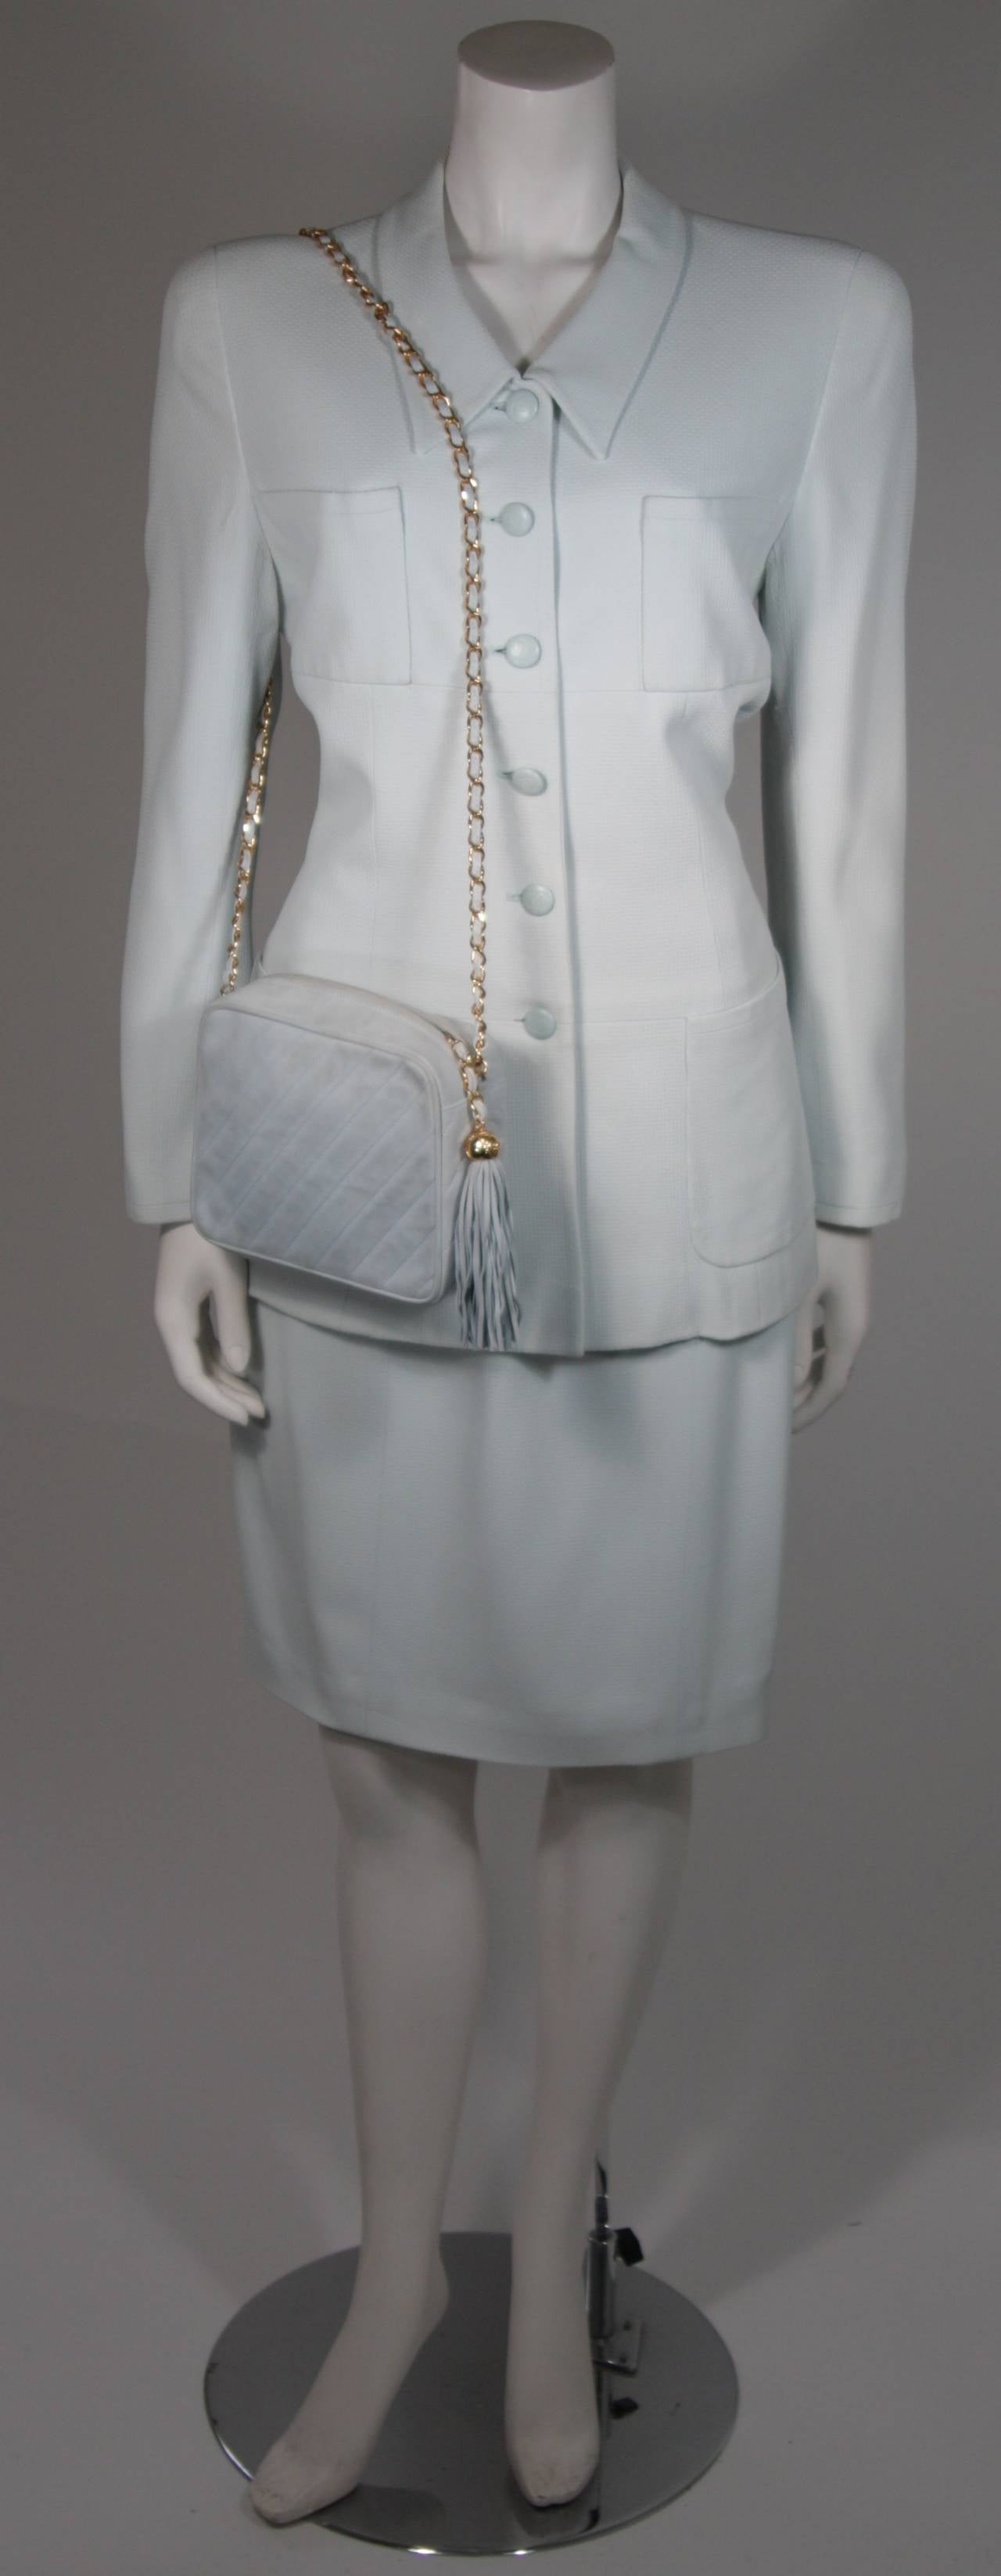 This Chanel suit is available for viewing at our Beverly Hills Boutique. We offer a large selection of evening gowns and luxury garments.

This skirt suit is composed of a light blue fabric and features a classic silhouette. The jacket has four